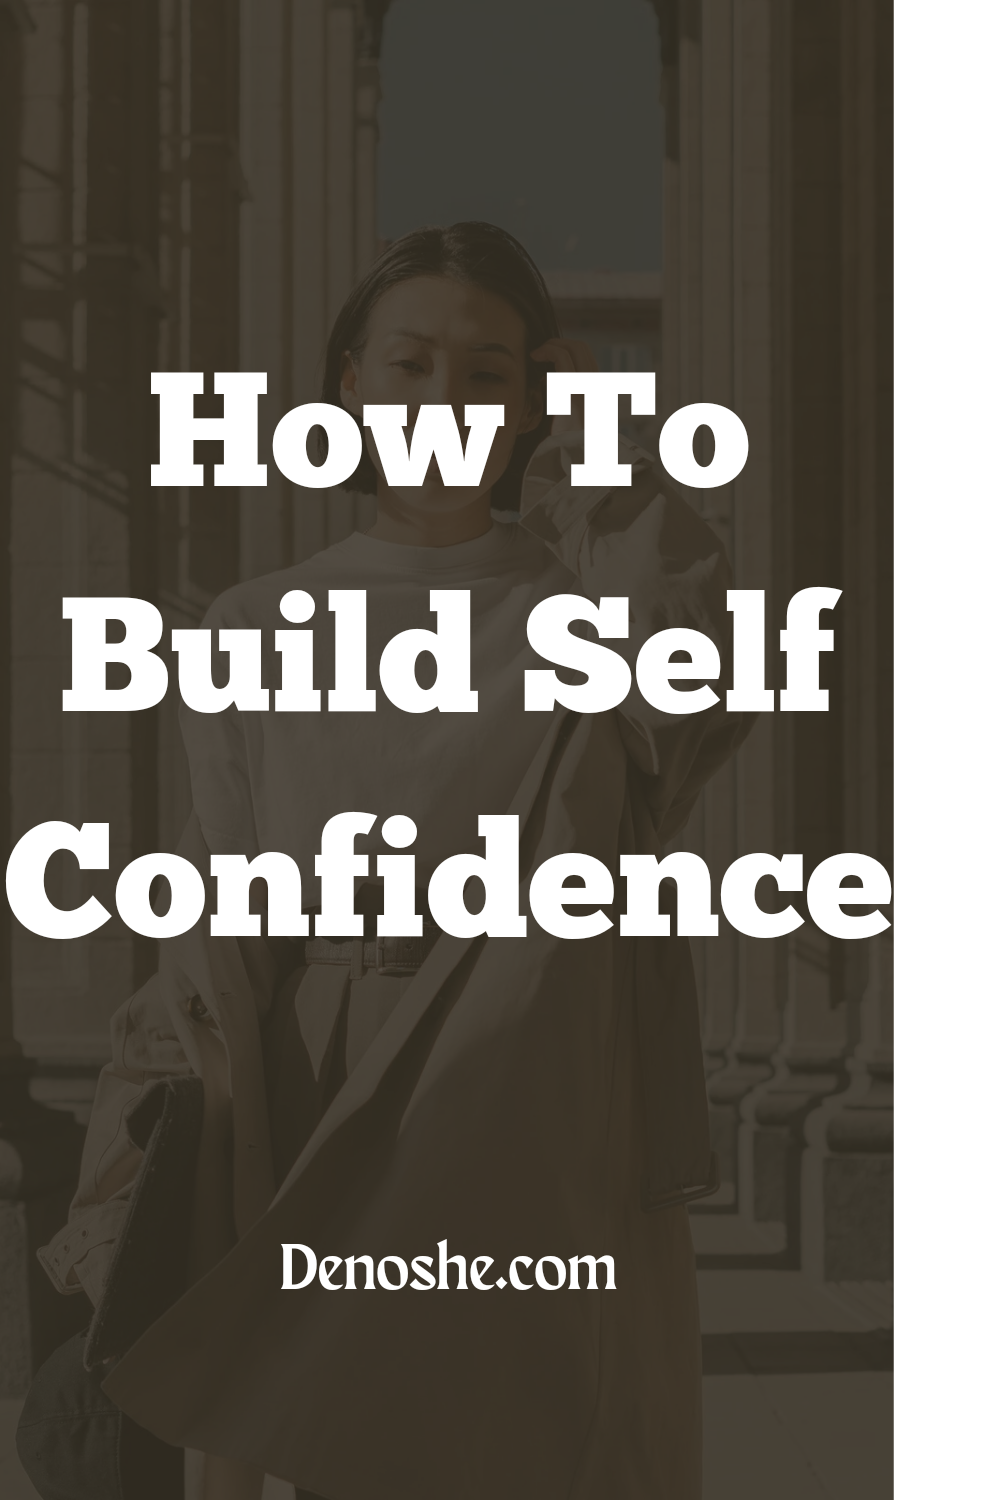 So here are a few tips drafted for you on building self-confidence.